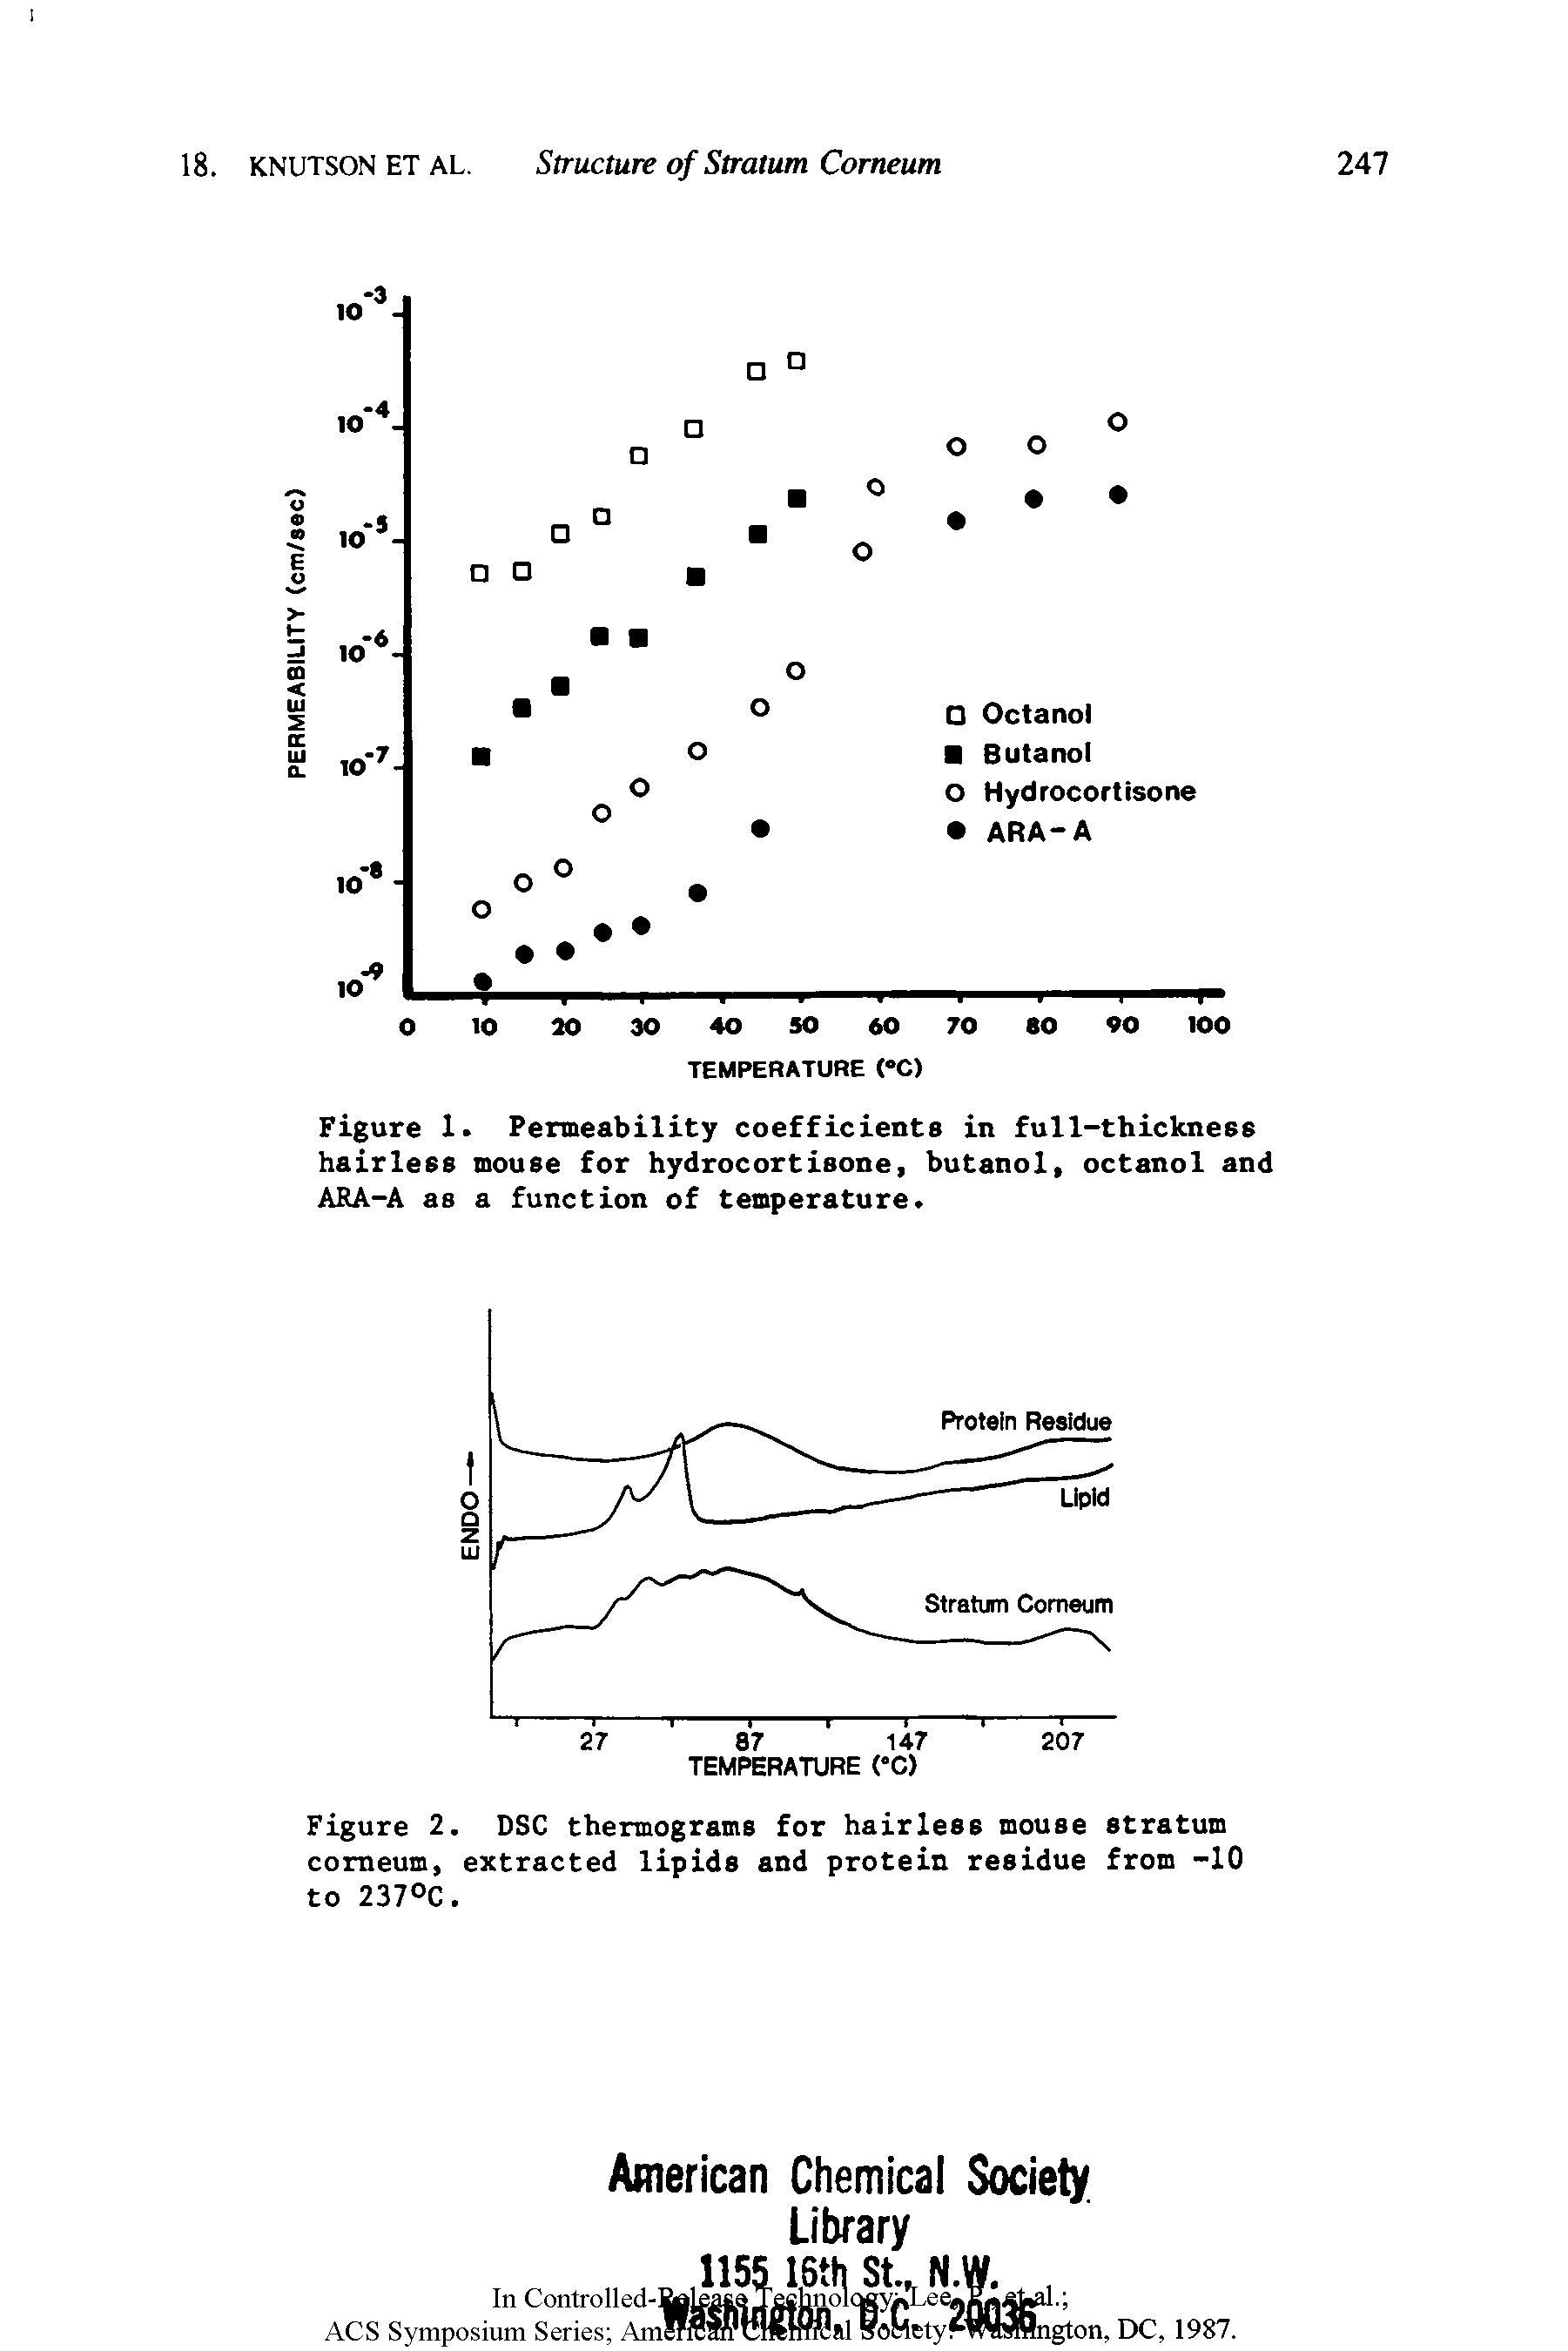 Figure 1. Permeability coefficients in full-thickness hairless mouse for hydrocortisone, butanol, octanol and ARA-A as a function of temperature.